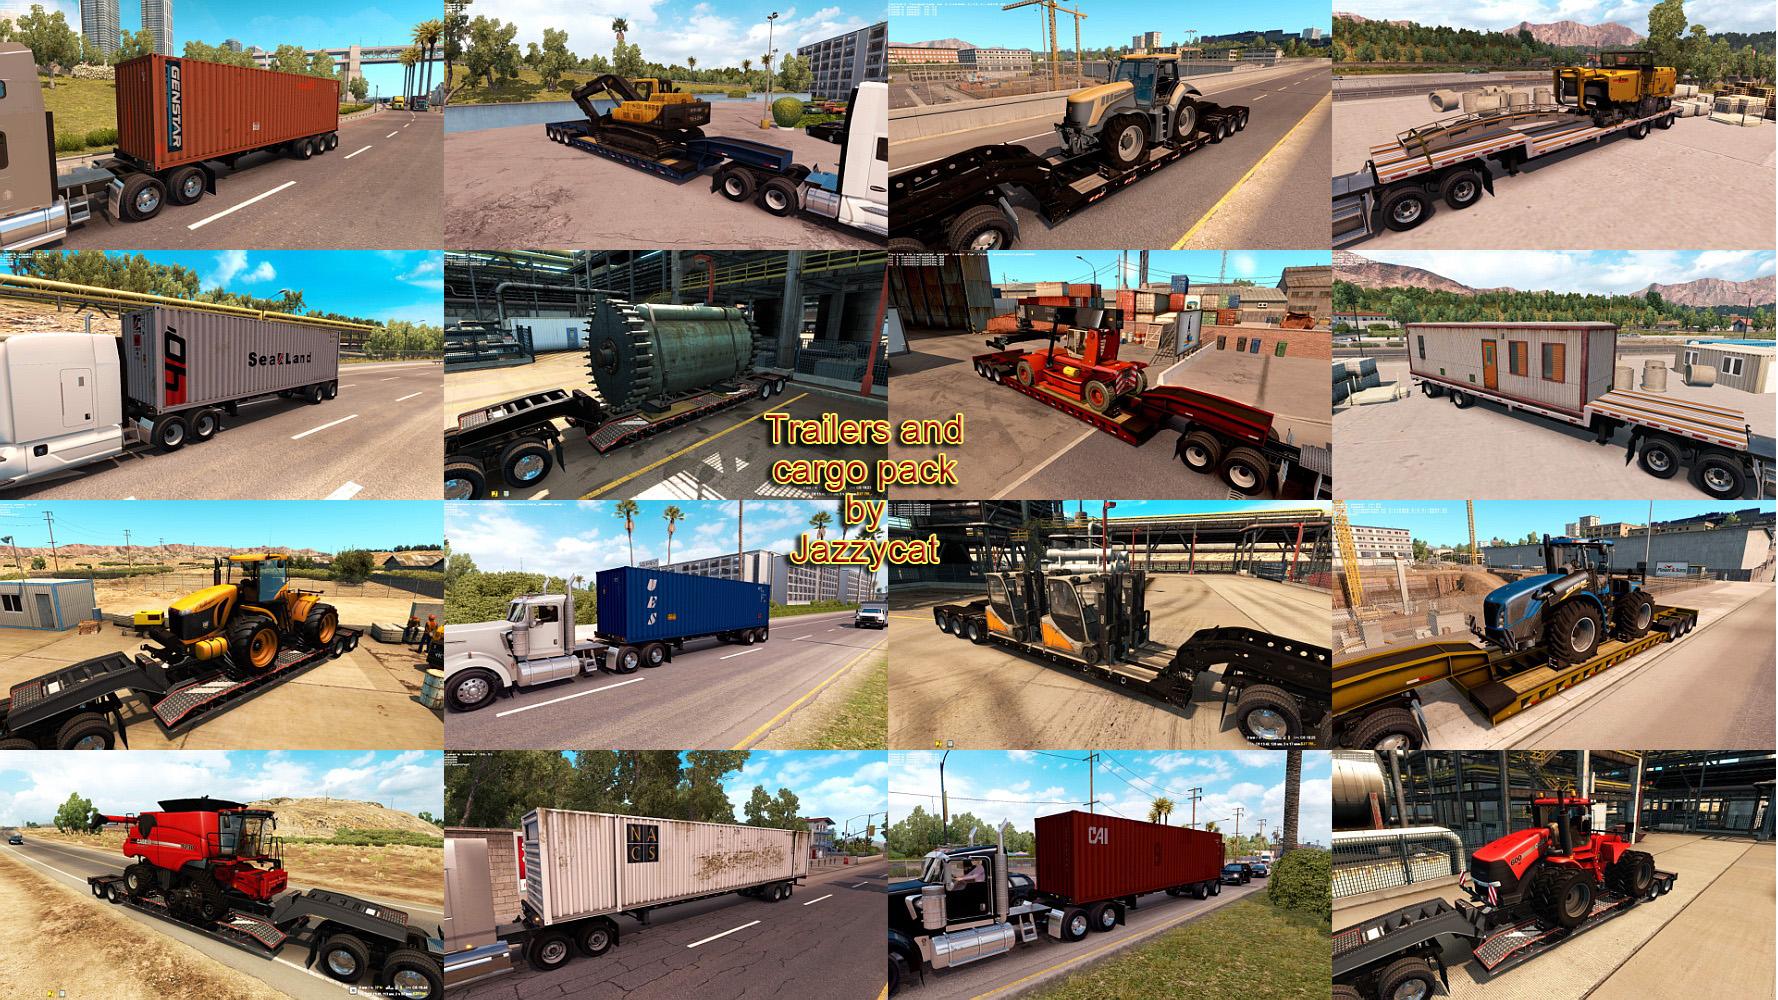 Атс 2 атс 3. American Truck Simulator прицепы. American Truck Simulator моды прицепы. Мод Trailers and Cargo Pack. Мод American Truck Simulator трал.